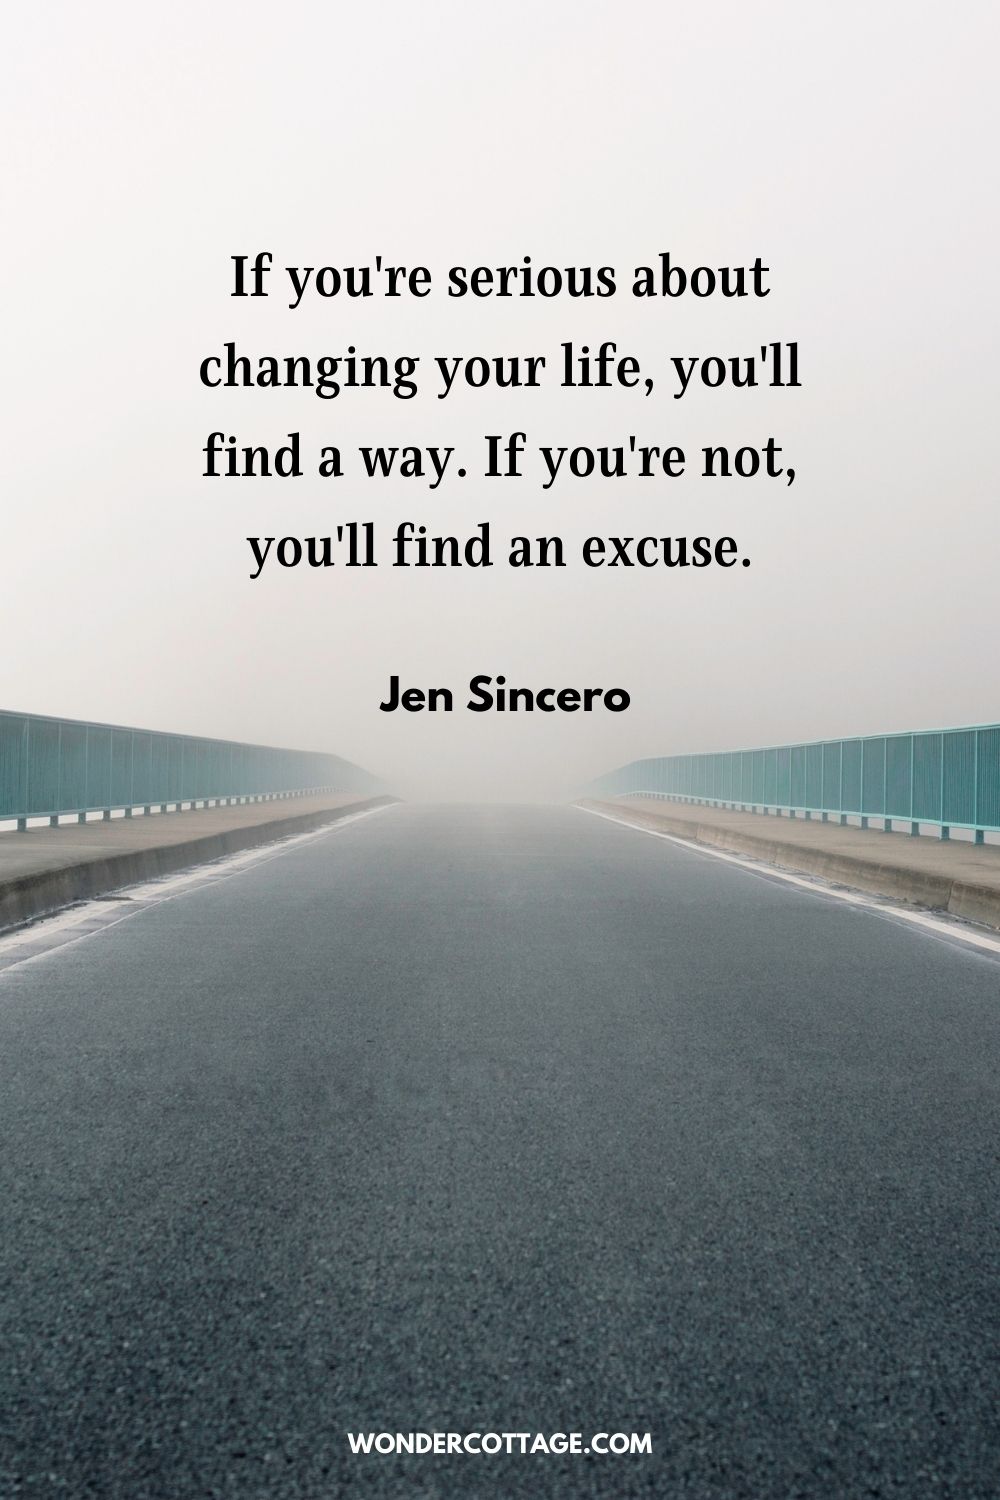 If you're serious about changing your life, you'll find a way. If you're not, you'll find an excuse.  Jen Sincero